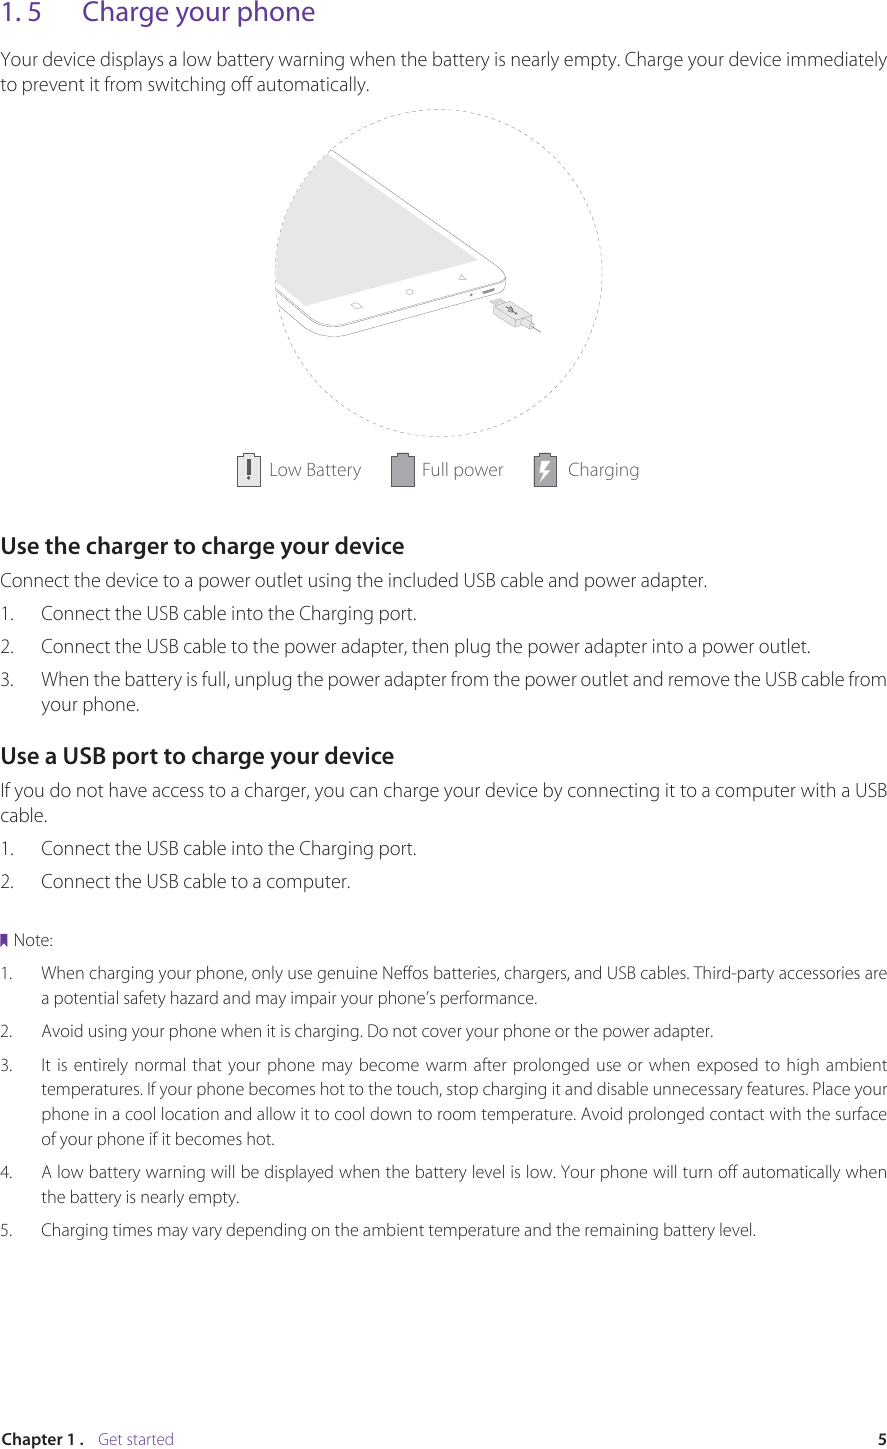 5Chapter 1 .    Get started1. 5  Charge your phoneYour device displays a low battery warning when the battery is nearly empty. Charge your device immediately to prevent it from switching off automatically.Full power ChargingLow BatteryUse the charger to charge your deviceConnect the device to a power outlet using the included USB cable and power adapter.1. Connect the USB cable into the Charging port.2. Connect the USB cable to the power adapter, then plug the power adapter into a power outlet.3.  When the battery is full, unplug the power adapter from the power outlet and remove the USB cable from your phone.Use a USB port to charge your deviceIf you do not have access to a charger, you can charge your device by connecting it to a computer with a USB cable.1. Connect the USB cable into the Charging port.2. Connect the USB cable to a computer.Note:1. When charging your phone, only use genuine Neffos batteries, chargers, and USB cables. Third-party accessories area potential safety hazard and may impair your phone’s performance. 2.  Avoid using your phone when it is charging. Do not cover your phone or the power adapter.3. It is entirely normal that your phone may become warm after prolonged use or when exposed to high ambienttemperatures. If your phone becomes hot to the touch, stop charging it and disable unnecessary features. Place your phone in a cool location and allow it to cool down to room temperature. Avoid prolonged contact with the surfaceof your phone if it becomes hot.4. A low battery warning will be displayed when the battery level is low. Your phone will turn off automatically whenthe battery is nearly empty.5.  Charging times may vary depending on the ambient temperature and the remaining battery level.